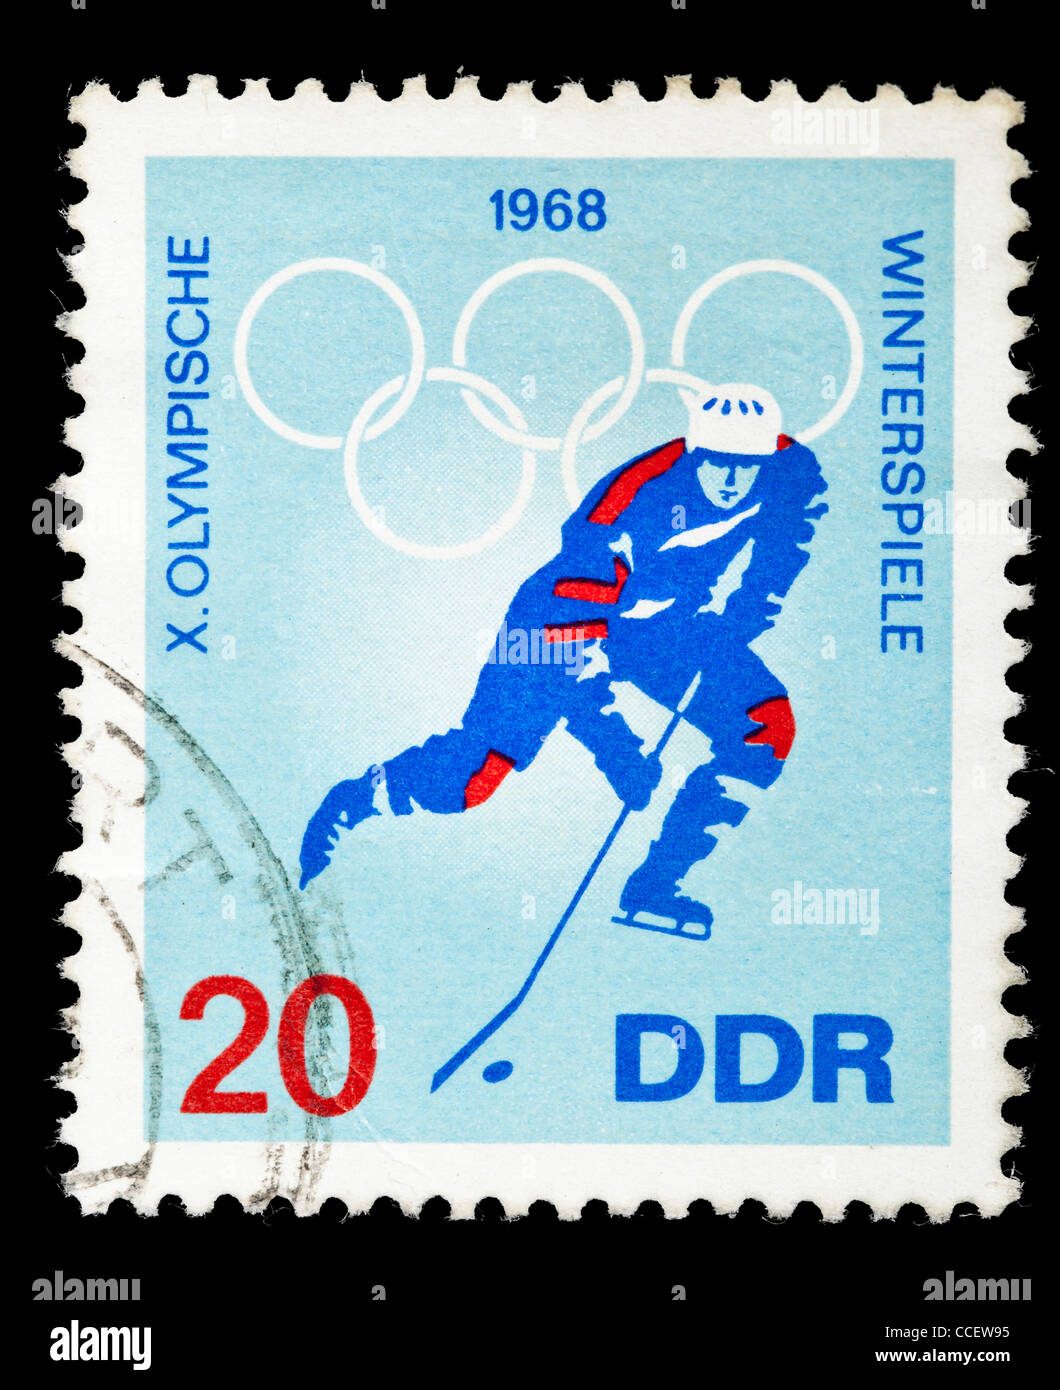 Postage stamp: X. Olympic Winter Games 1968, DDR, stamped Stock Photo